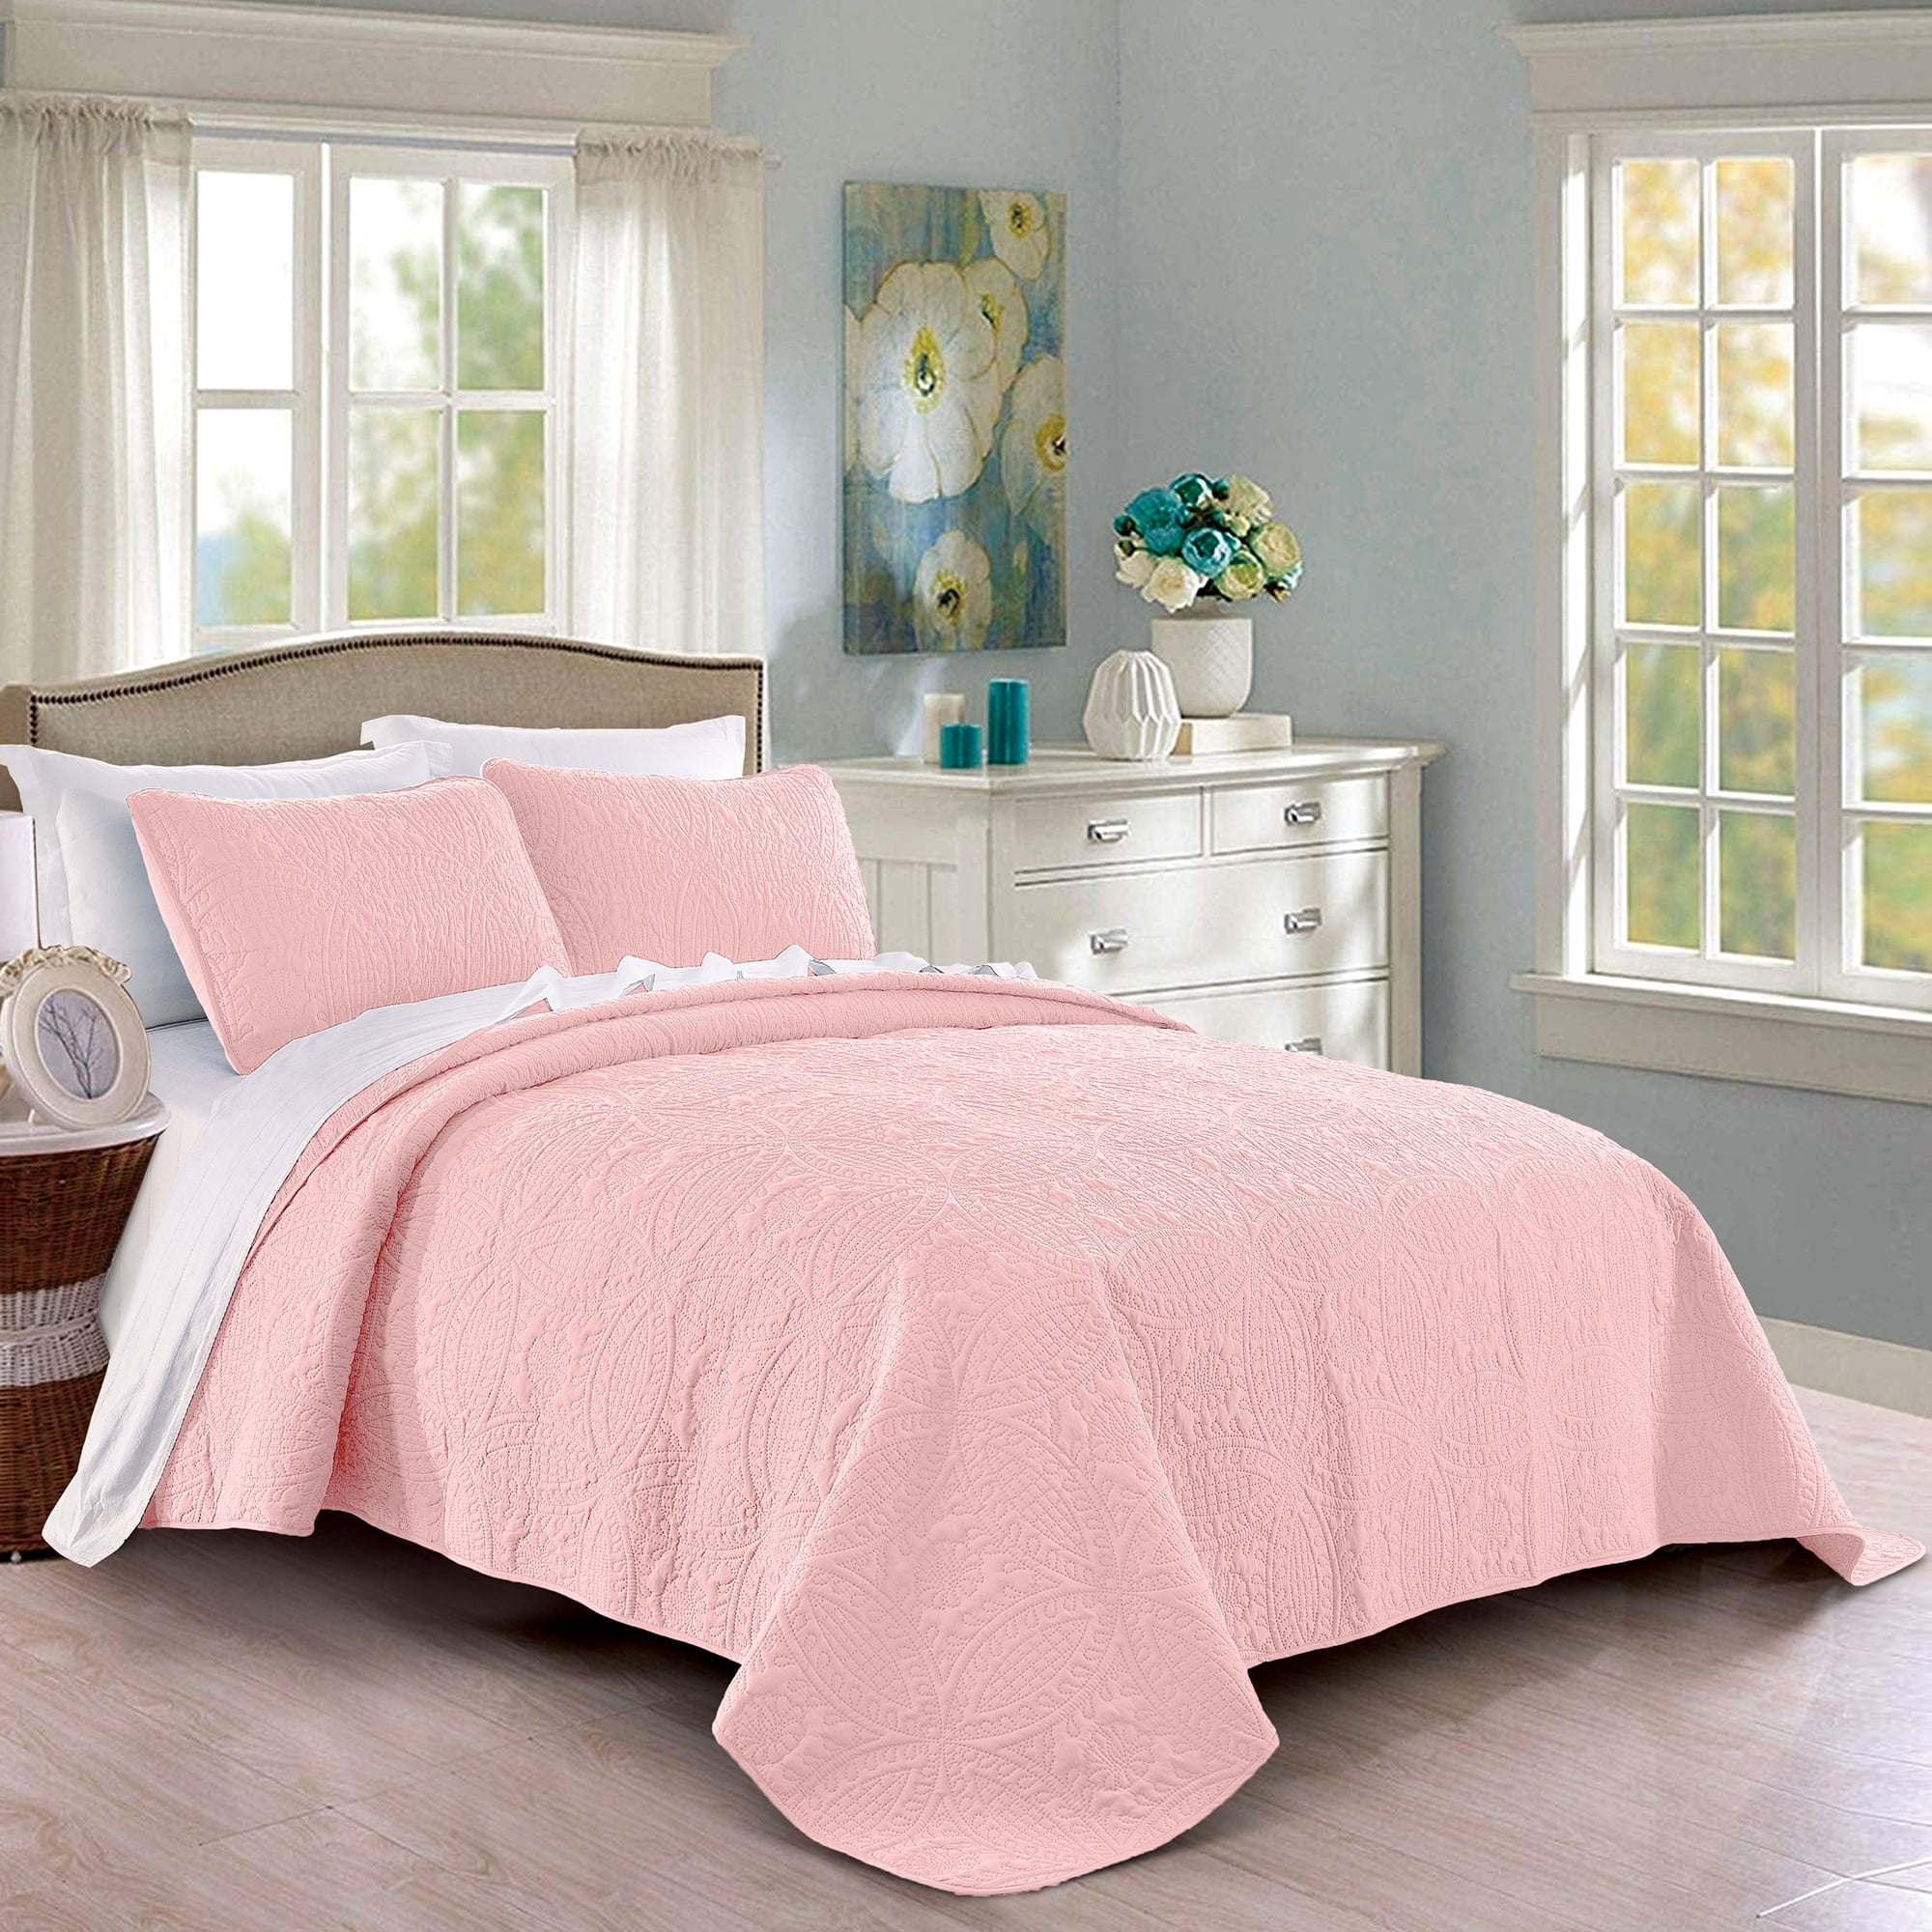 Quilt Set Full/Queen Size Baby Pink - Oversized Bedspread - Soft Microfiber  Lightweight Coverlet for All Season - 3 Piece Includes 1 Quilt and 2 Shams,  Geometric Pattern 